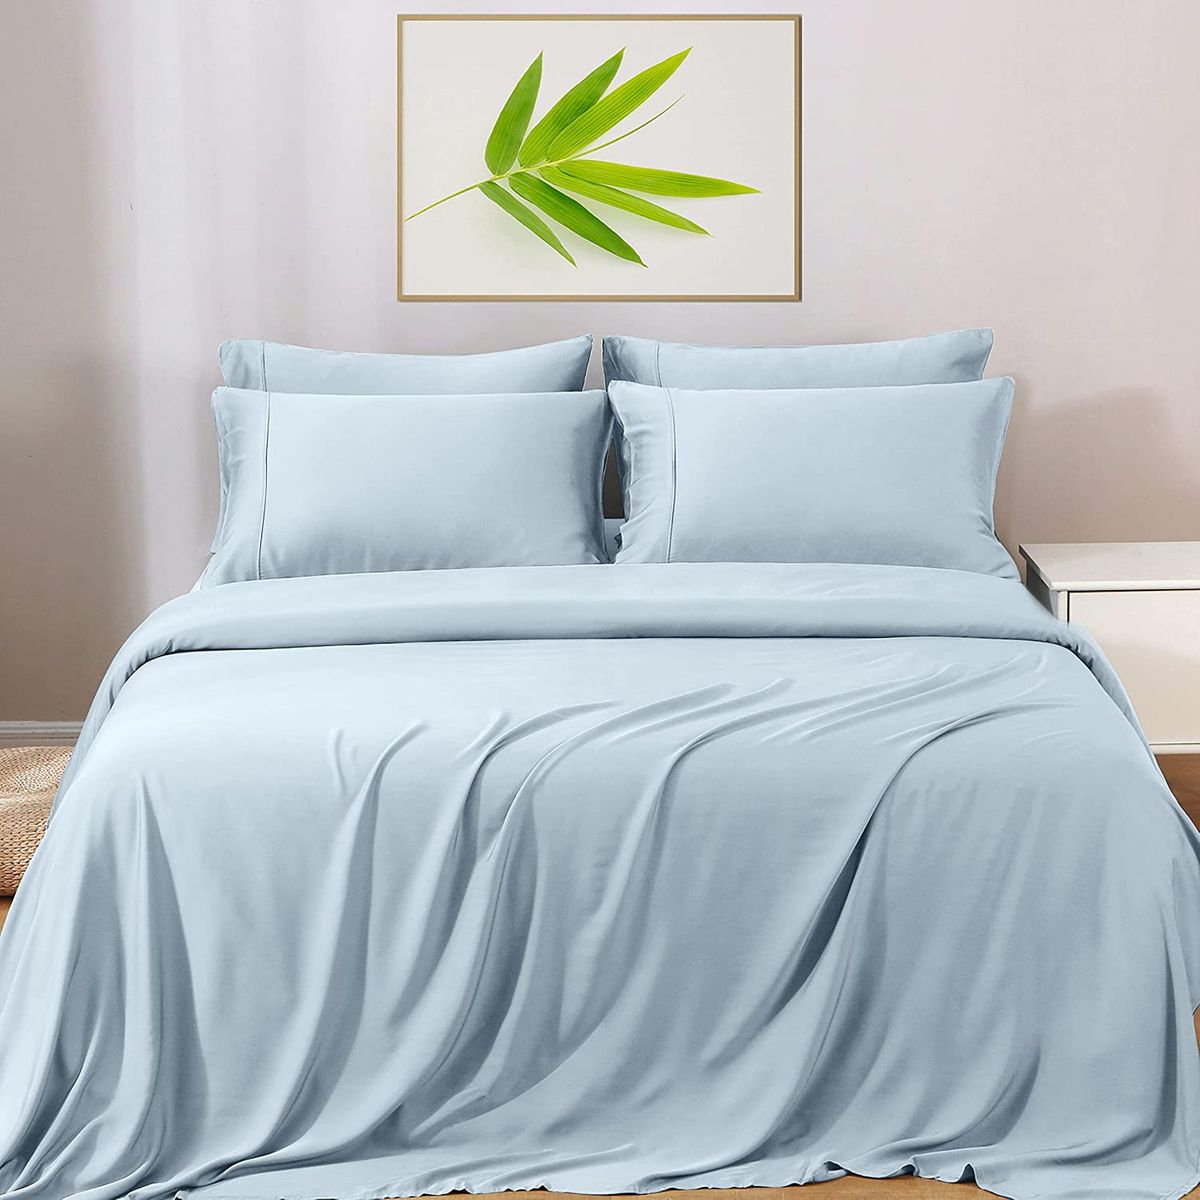 Best Bed Sheets to Keep Cool